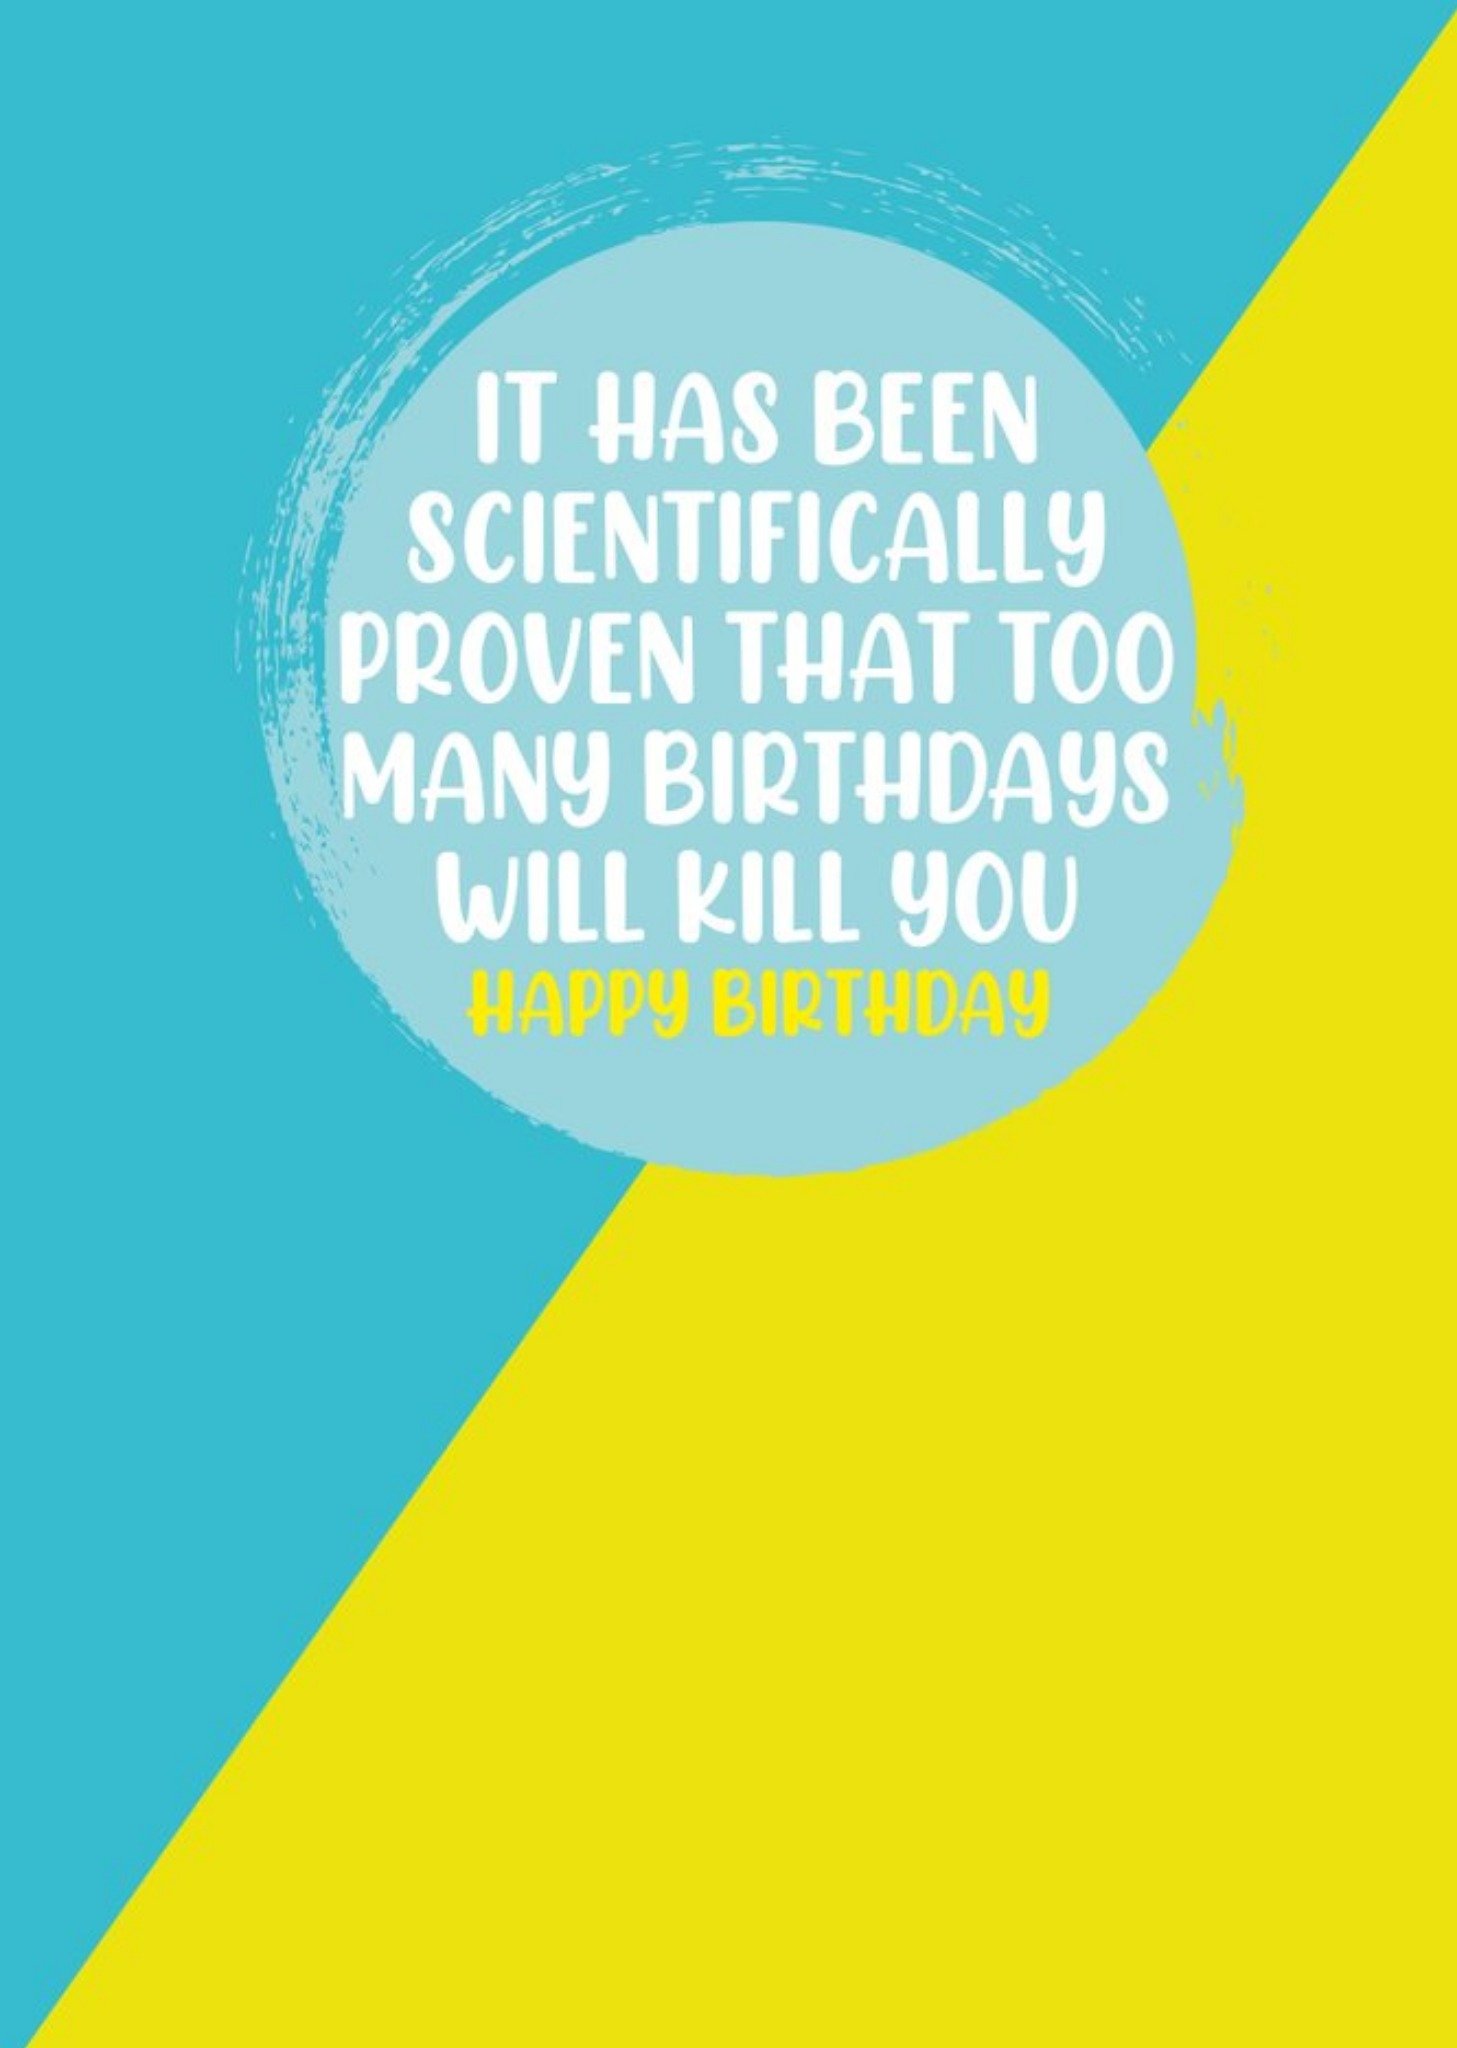 Filthy Sentiments Scientifically Proven Too Many Birthdays Will Kill You Blue And Yellow Themed Birt